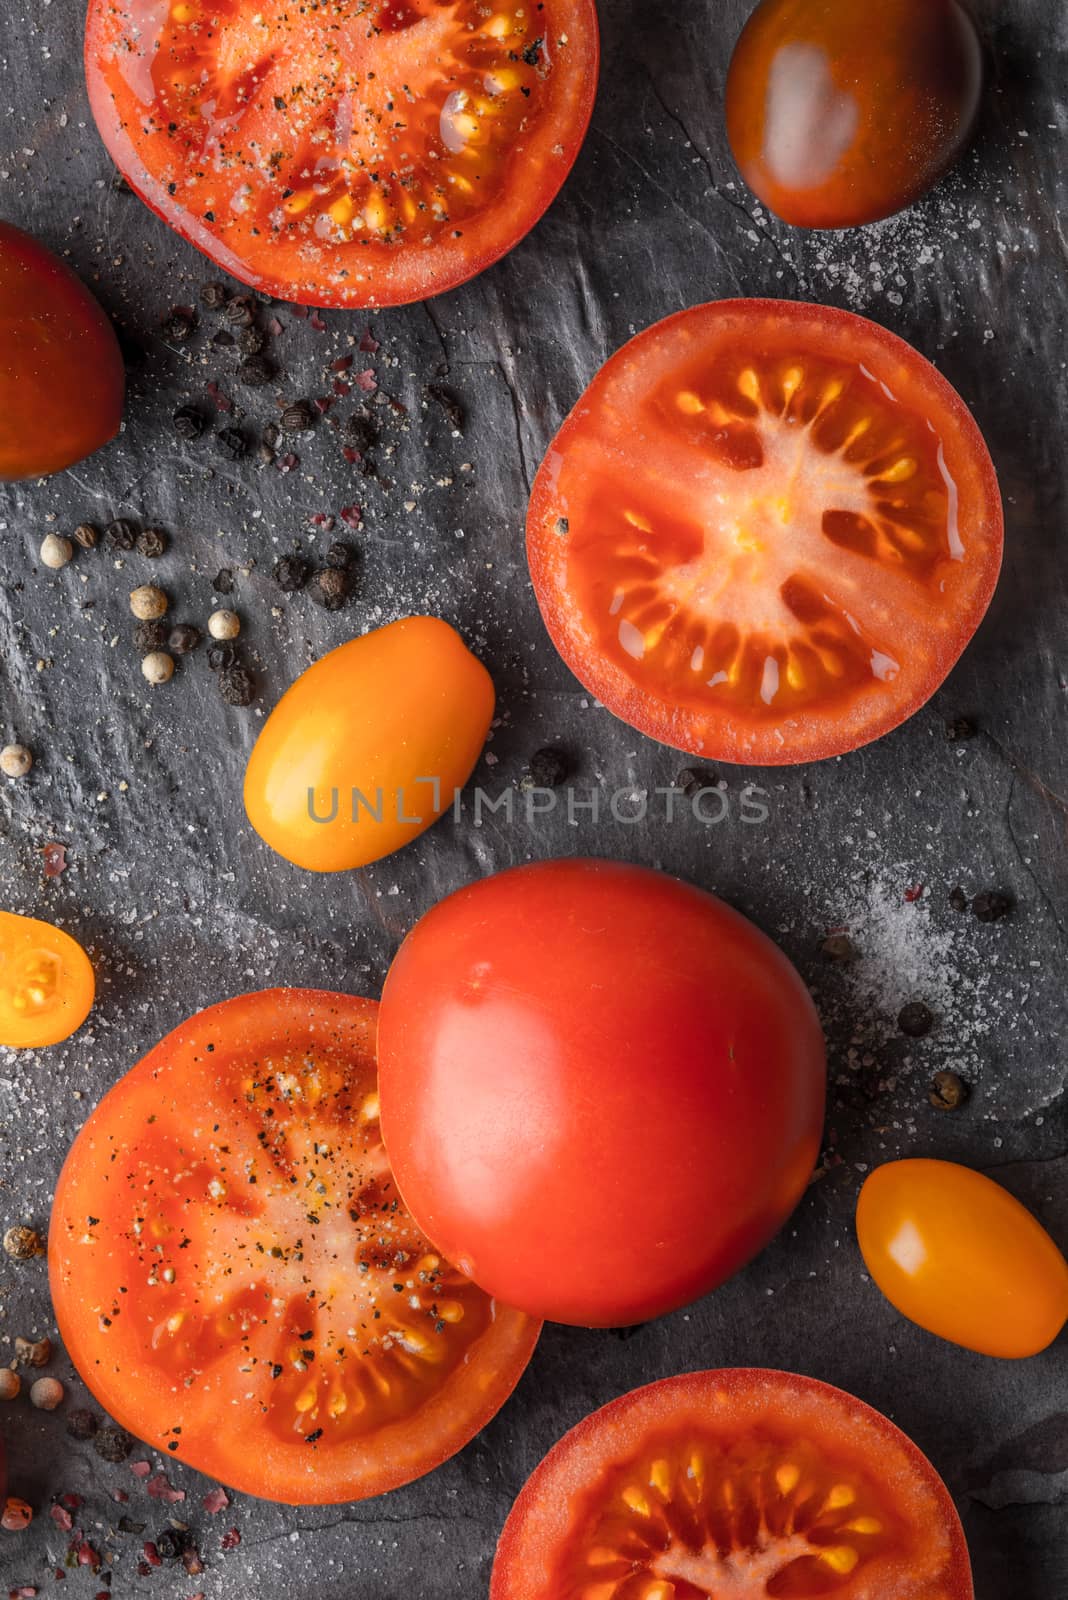 Tomatoes mix  with seasoning on the stone table vertical